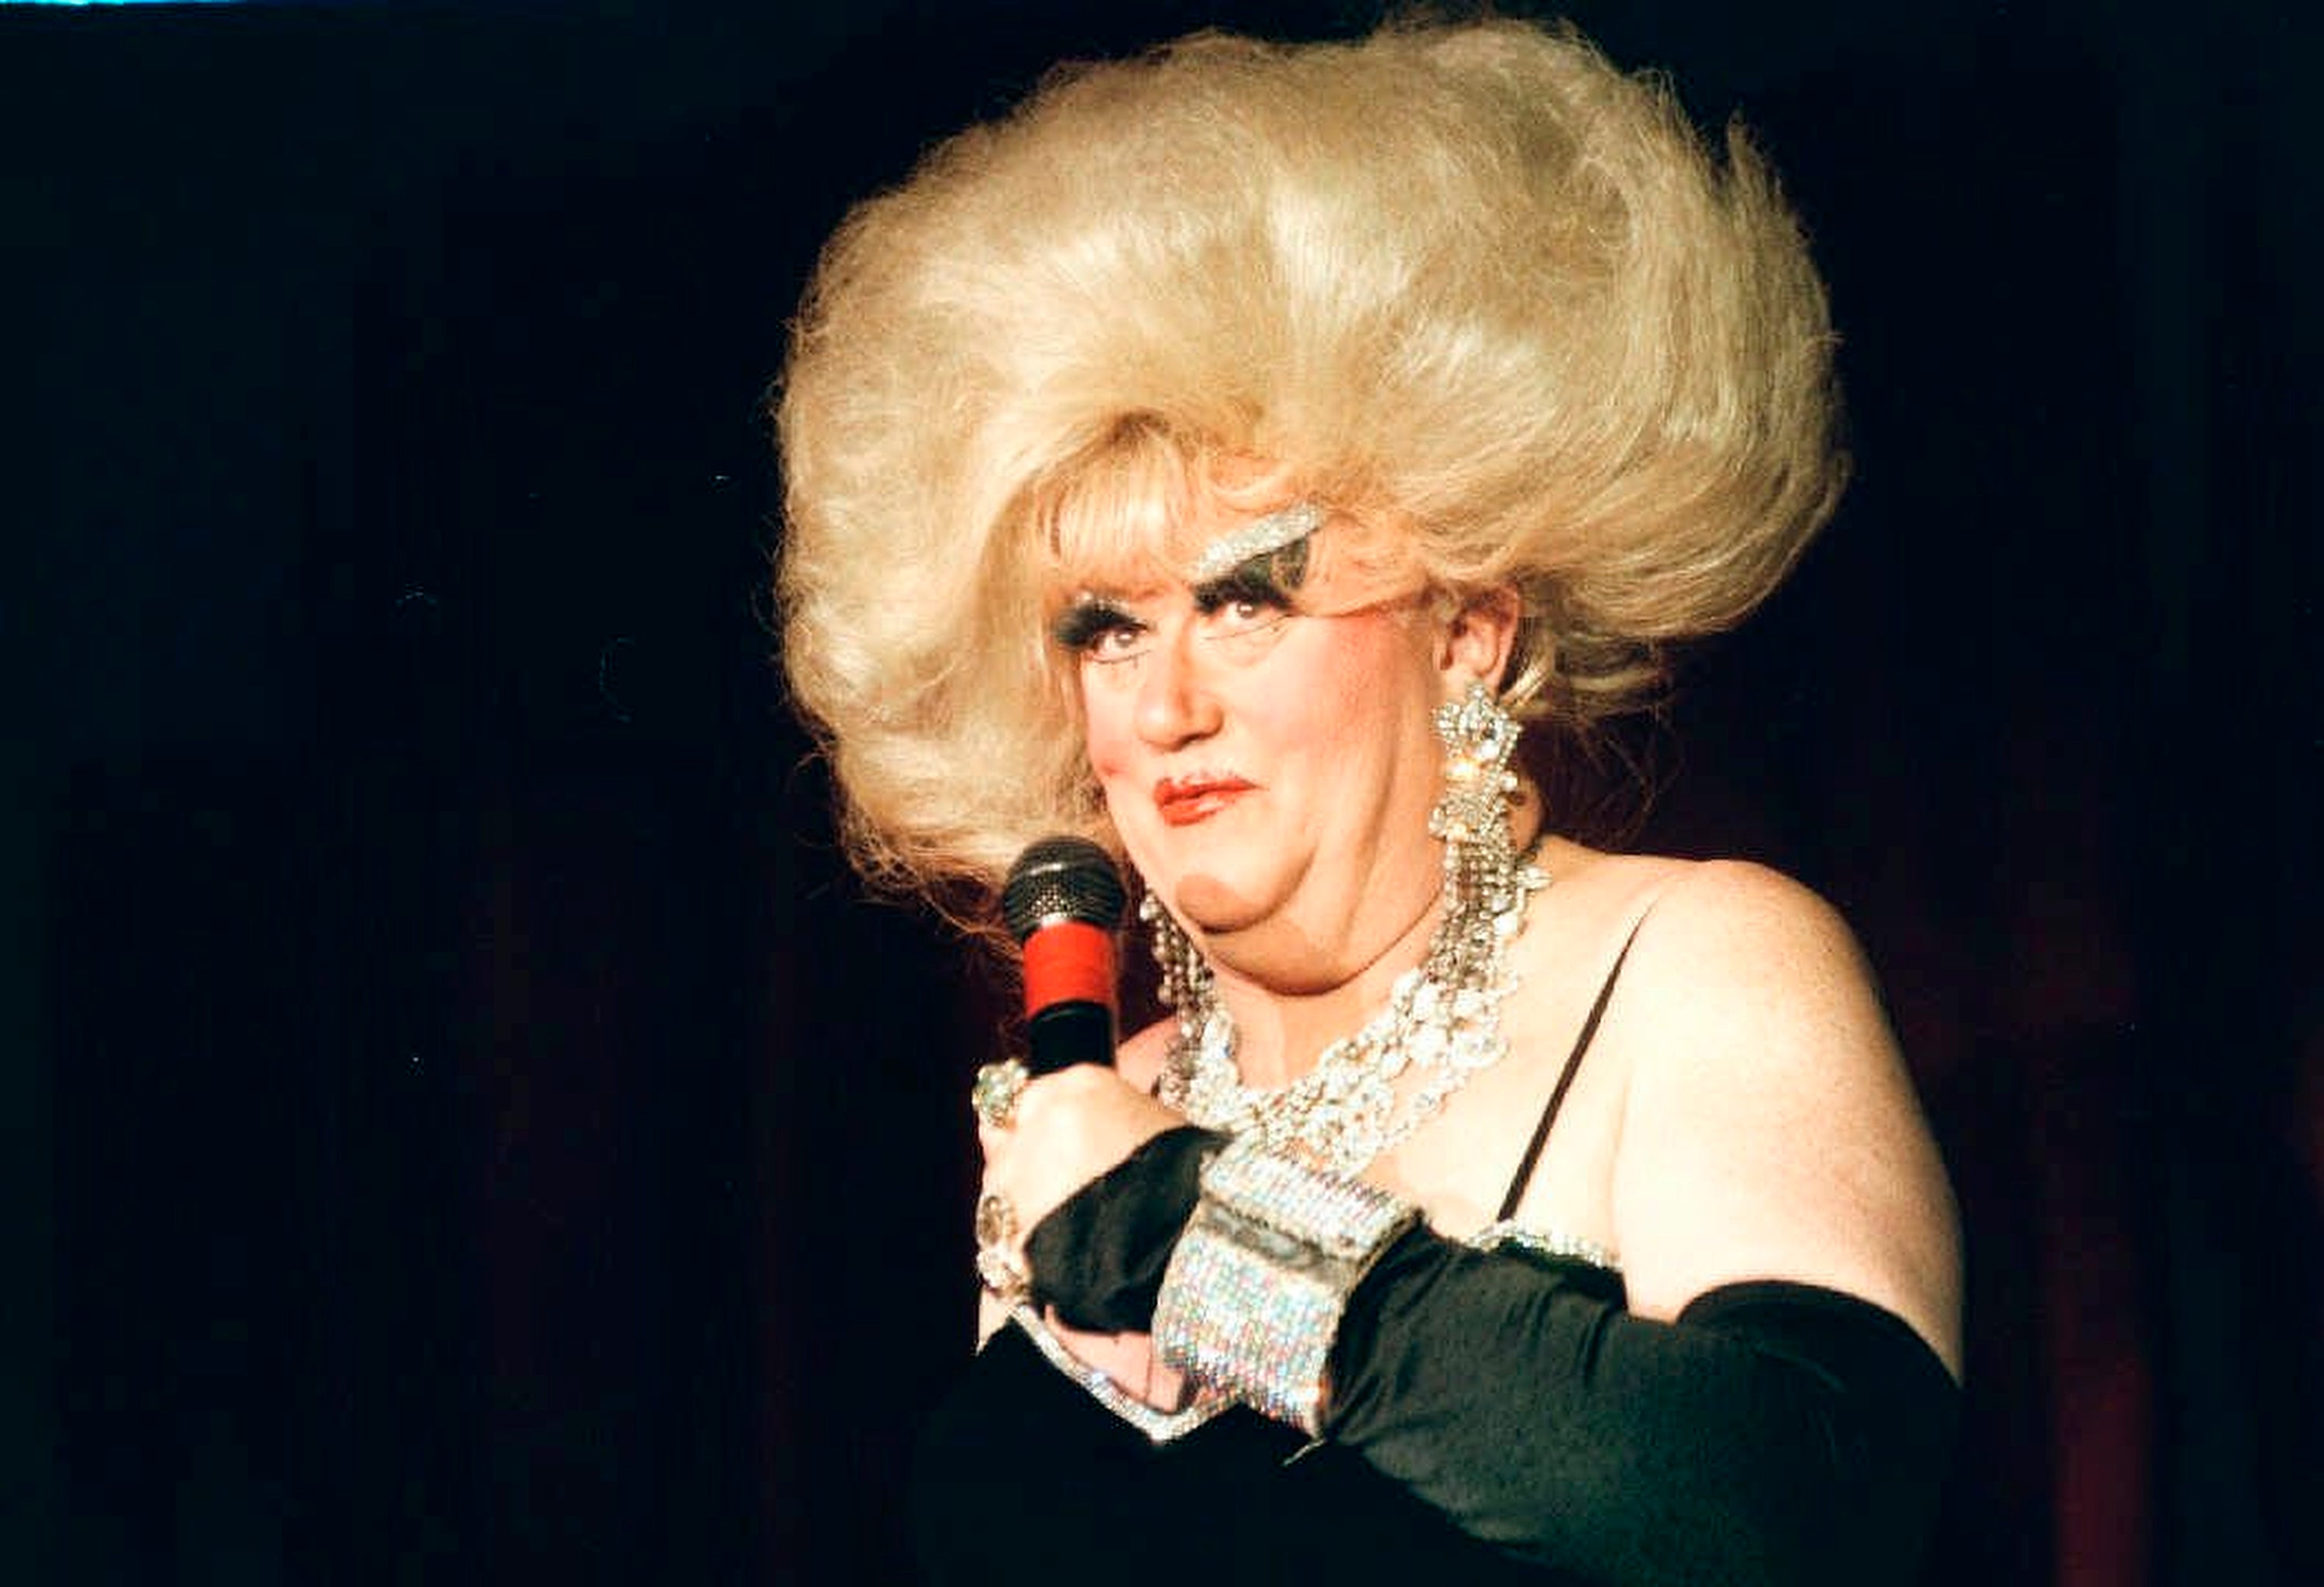 File photo: Darcelle XV was crowned the world’s oldest working drag performer in 2016 by the Guinness Book of World Records